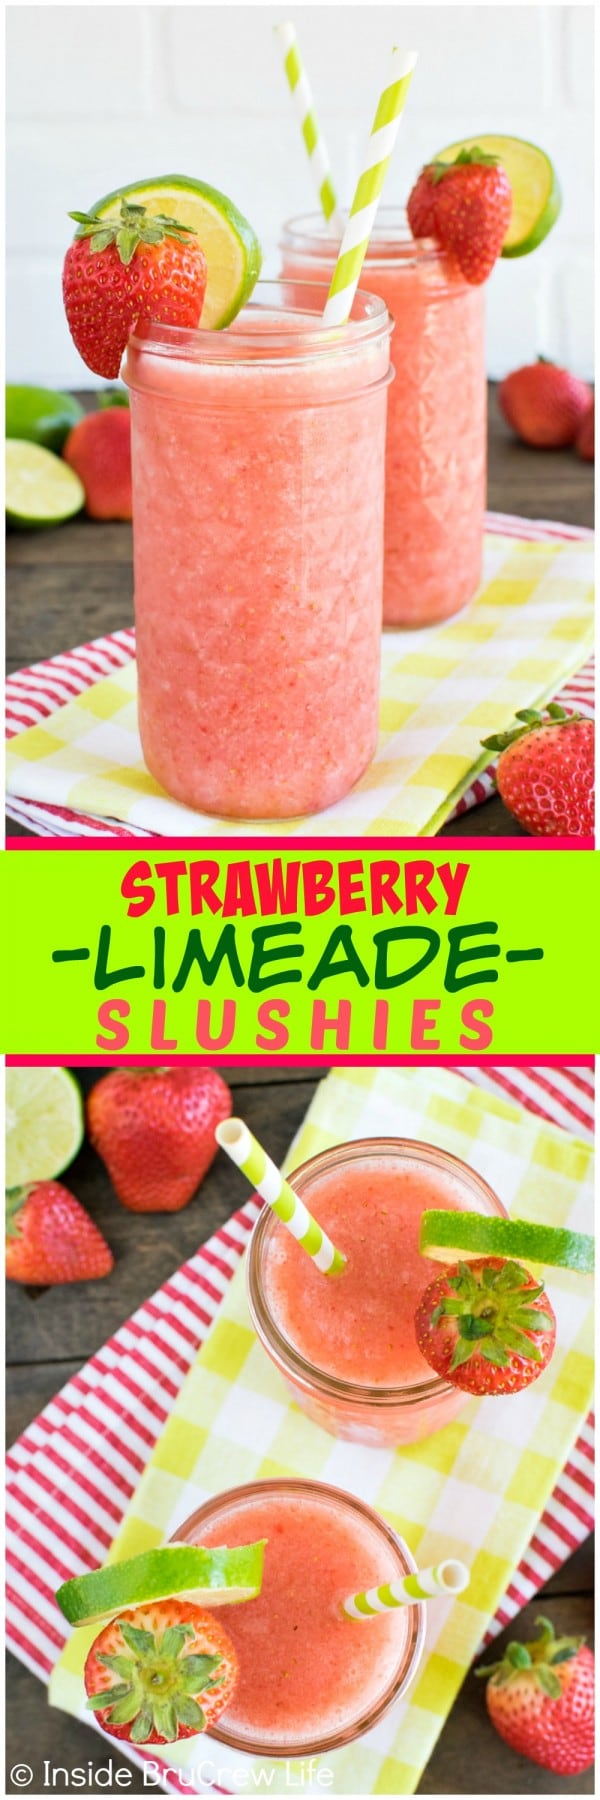 Strawberry Limeade Slushies - fresh berries, juice, and ice blended together makes a refreshing drink on a hot day! Great frozen drink recipe!